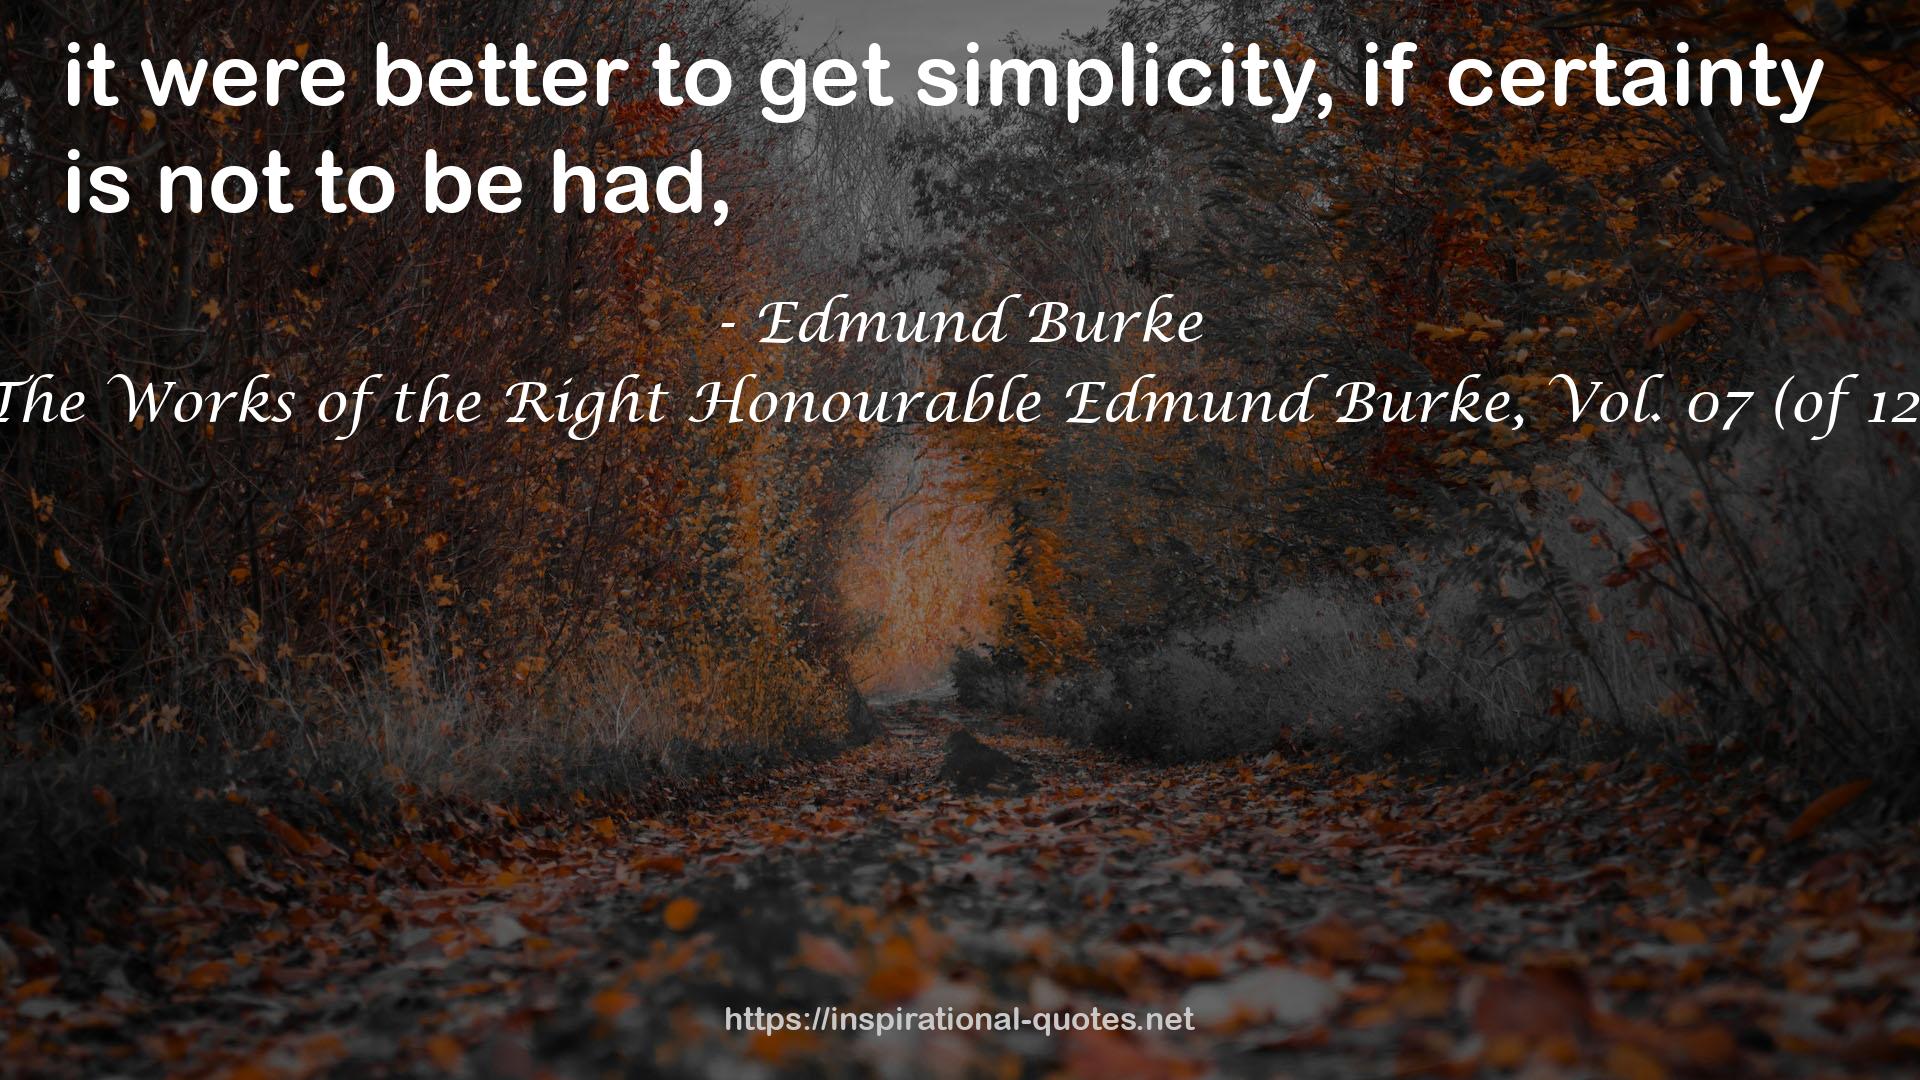 The Works of the Right Honourable Edmund Burke, Vol. 07 (of 12) QUOTES